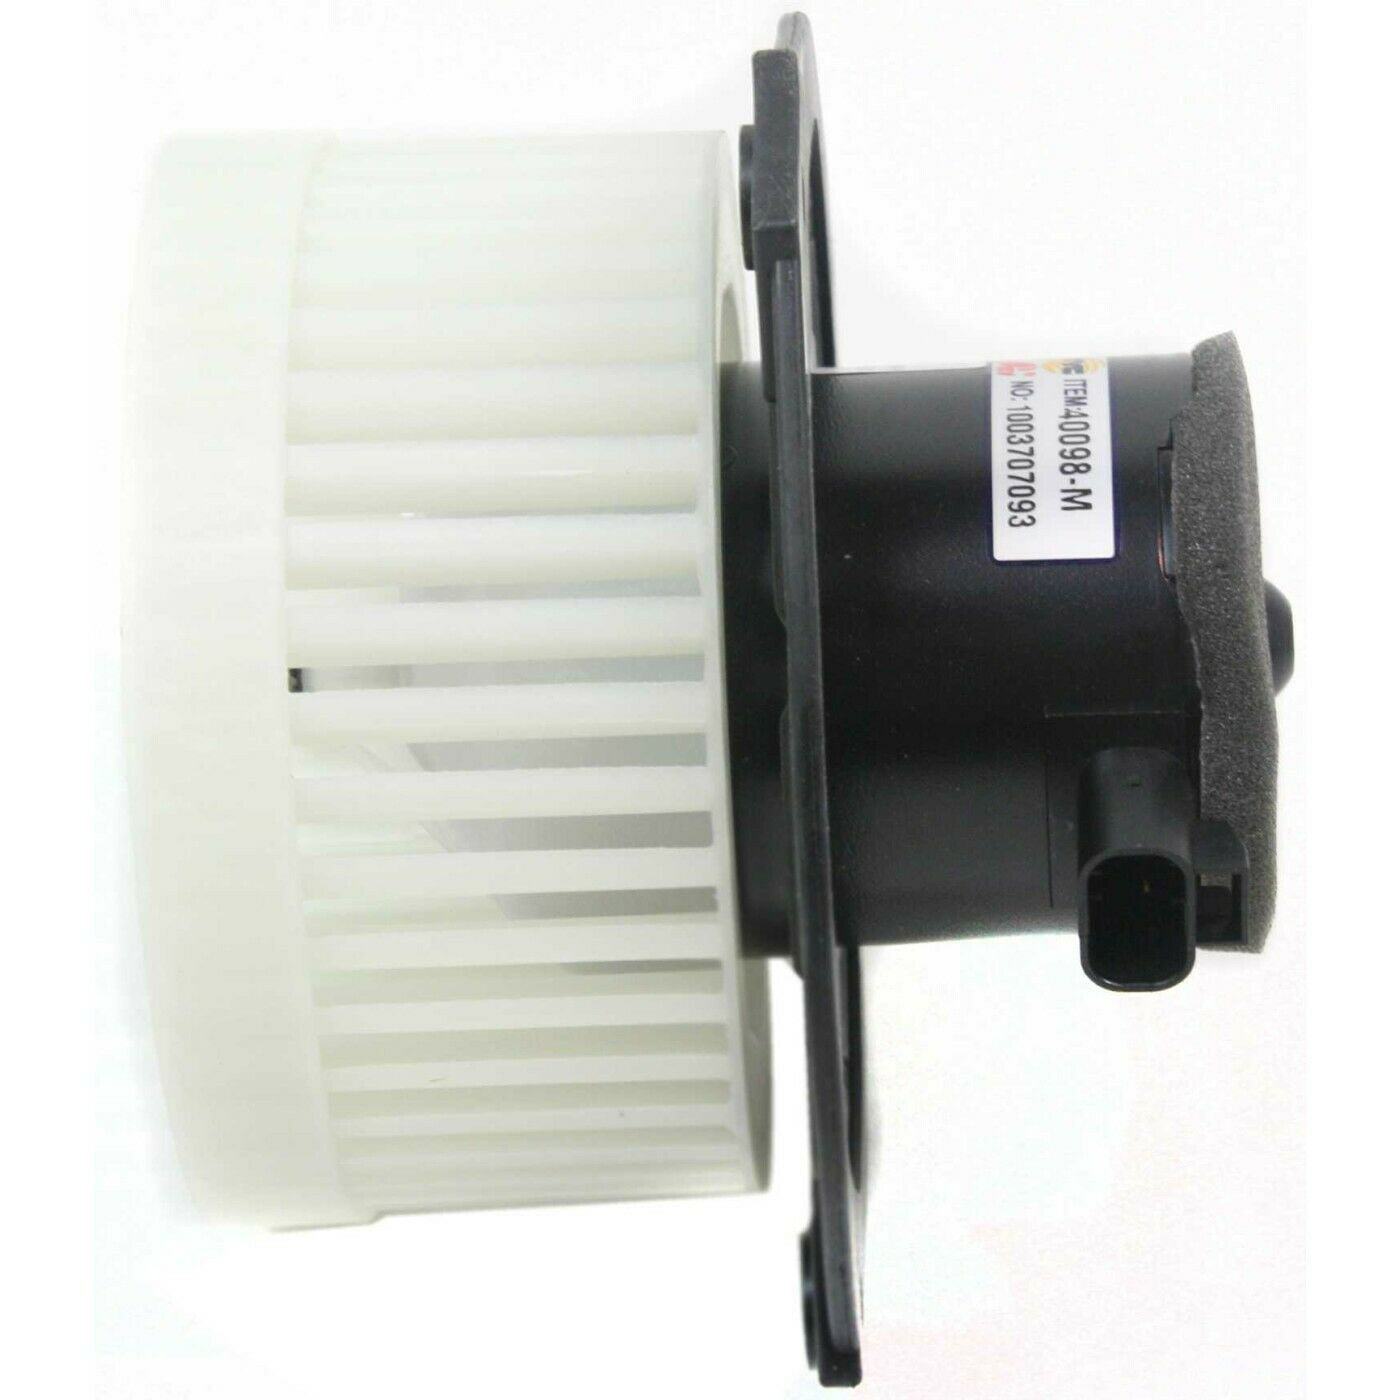 A/C Heater Blower Motor w/ Fan Cage 8890187470 for Isuzu Saab Buick Chevy Olds